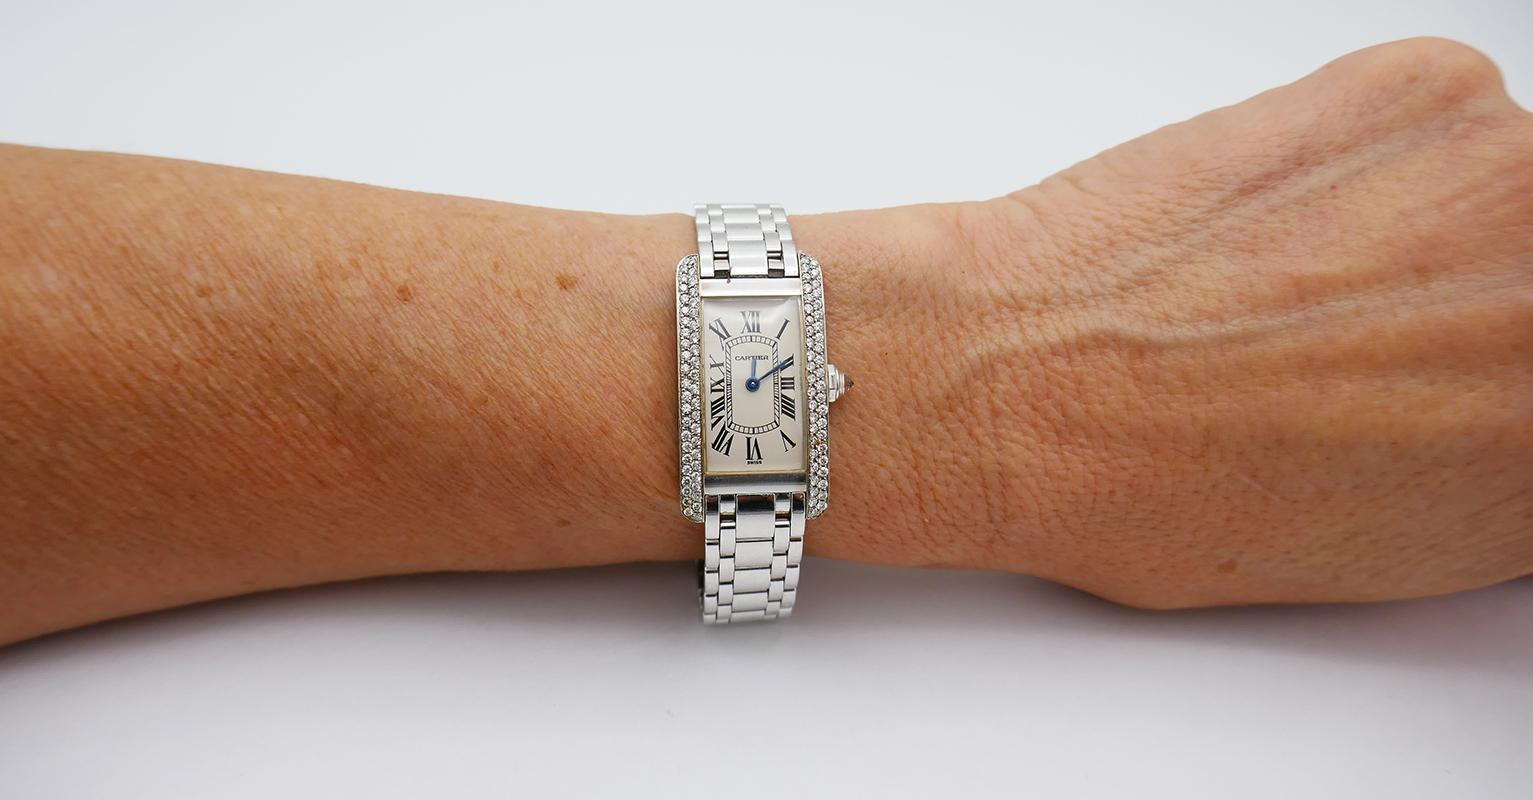 A vintage Cartier Tank Américaine watch made of 18k white gold with two rows of diamonds on the sides.
The Tank model is an iconic classic watch by Cartier designed in 1917. The look of the watch was inspired by the Renault FT-14, a French tank used